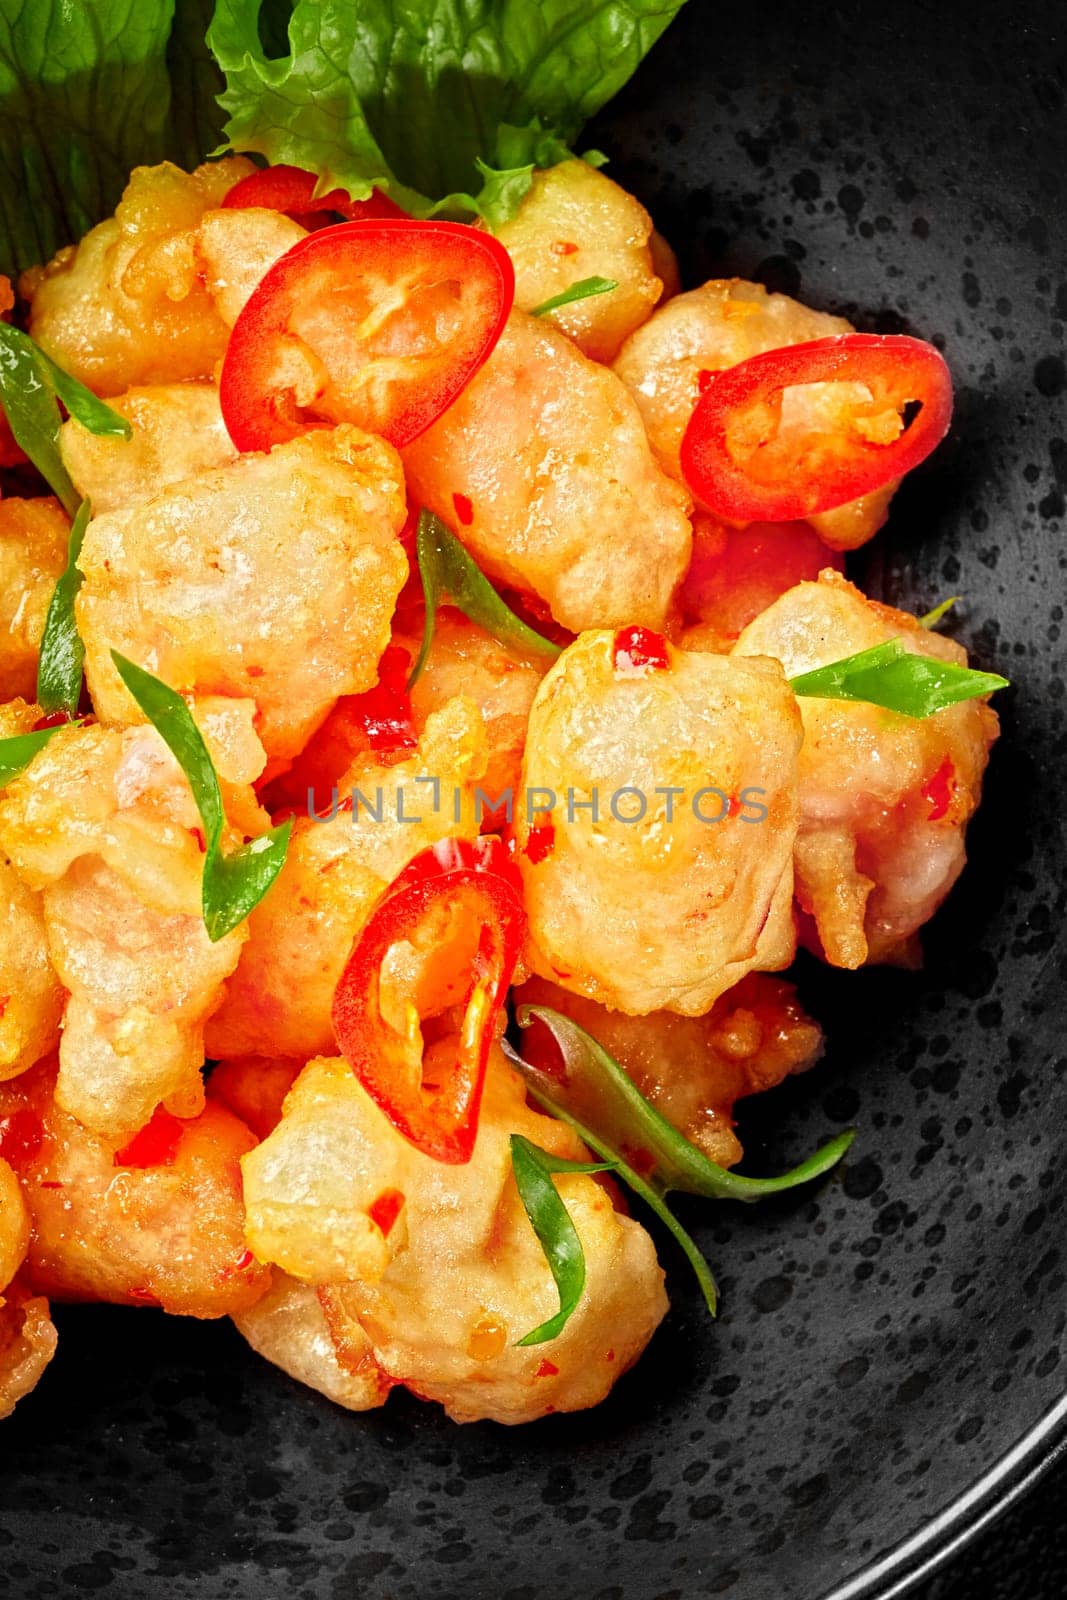 Wok fried cod fillet pieces in batter with chili pepper and greens by nazarovsergey